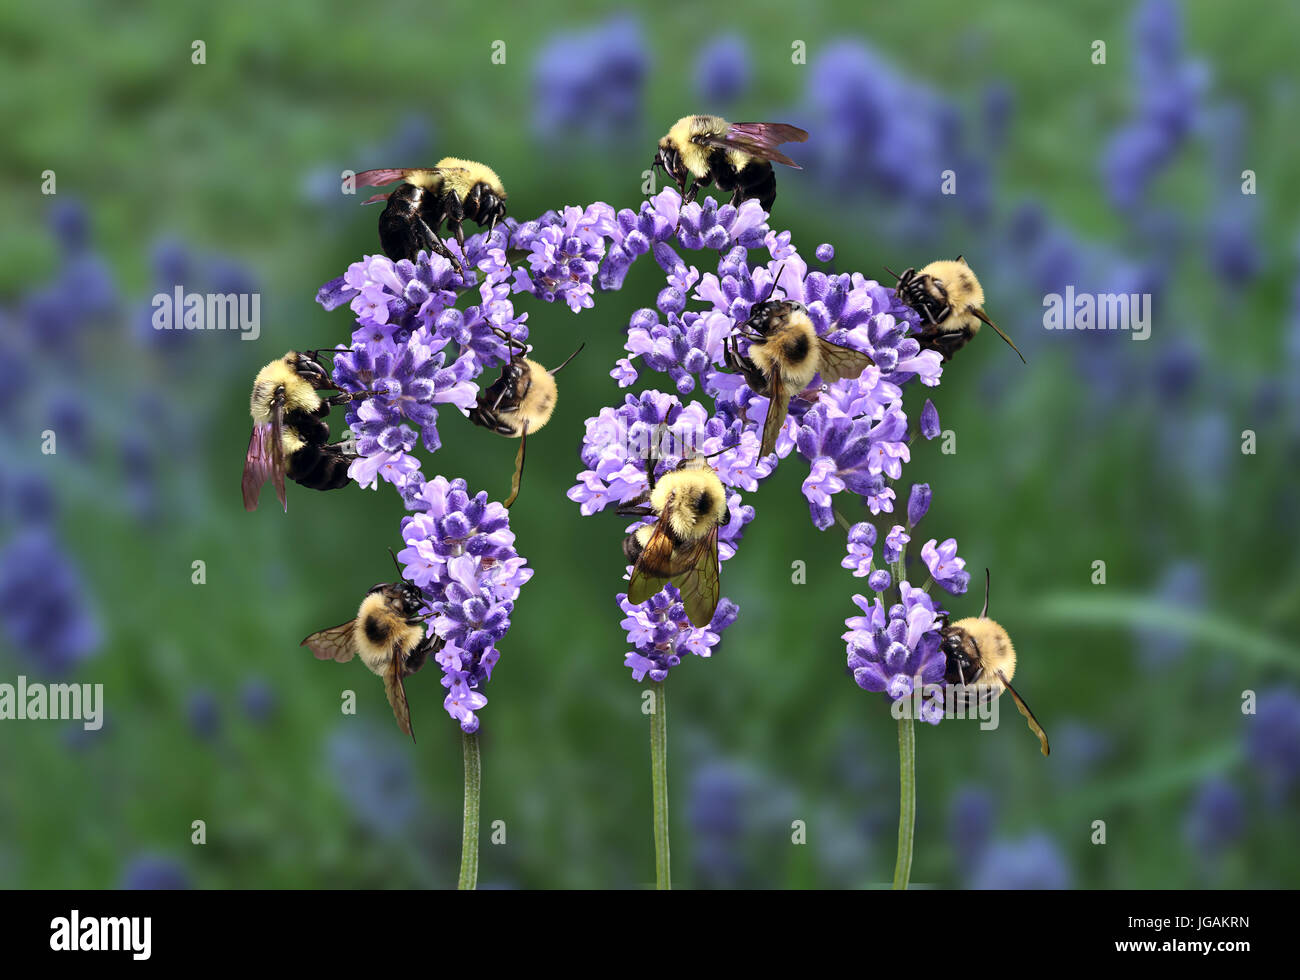 Global teamwork concept and international strategy as a group of working bees harvesting nectar together from a flower shaped as a world globe. Stock Photo